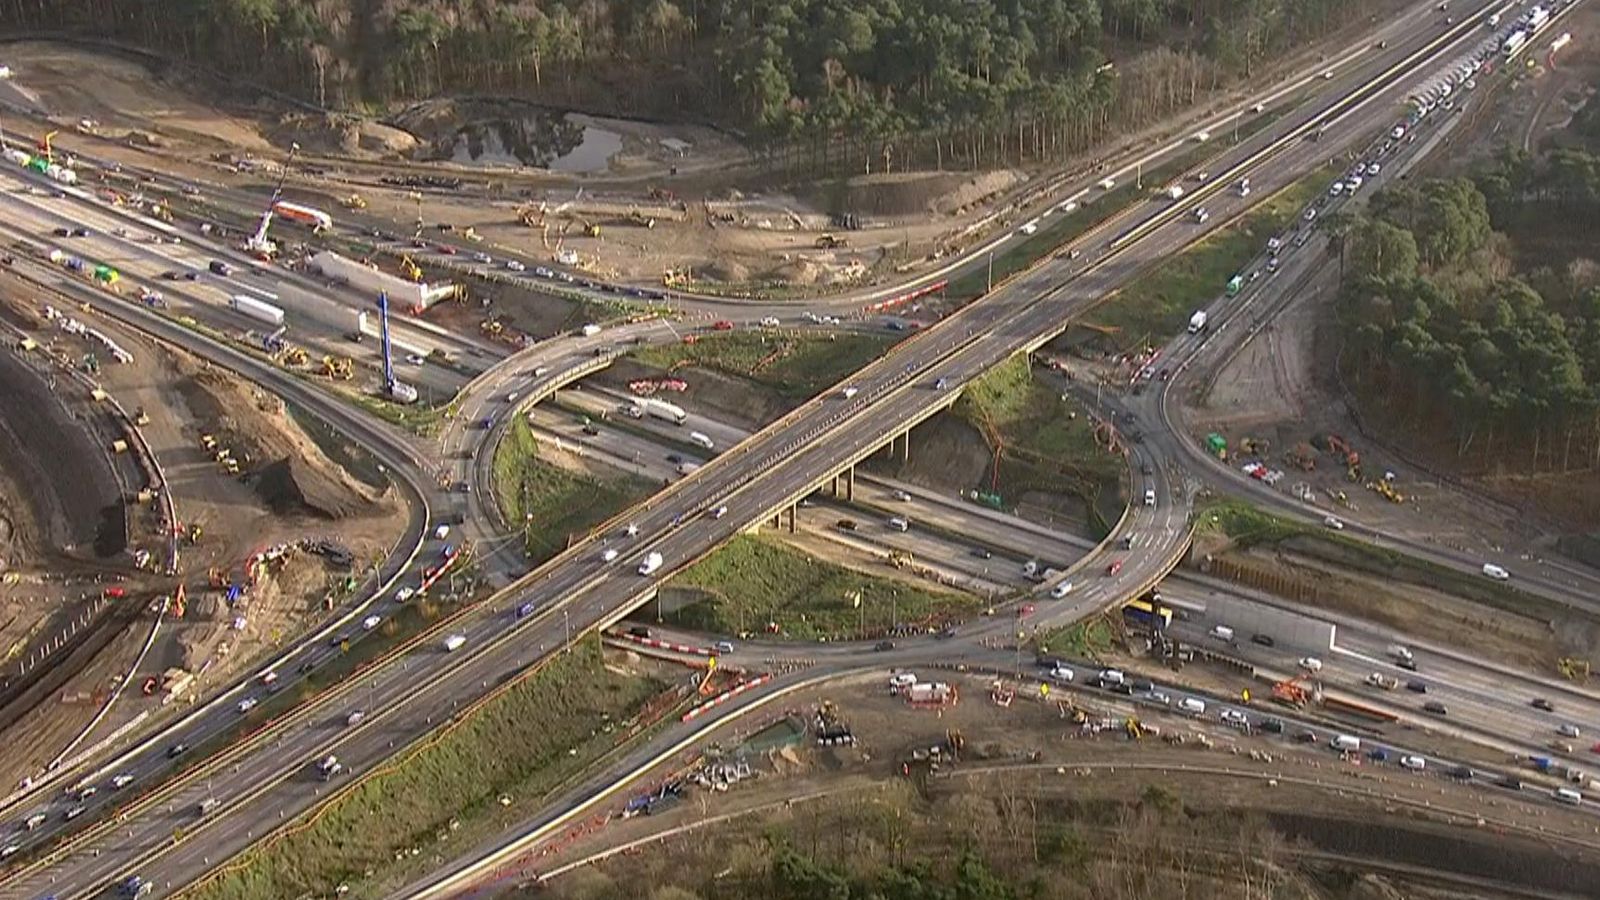 M25 closure: Aerial pictures show calm amid weekend gridlock fears with section of motorway shut